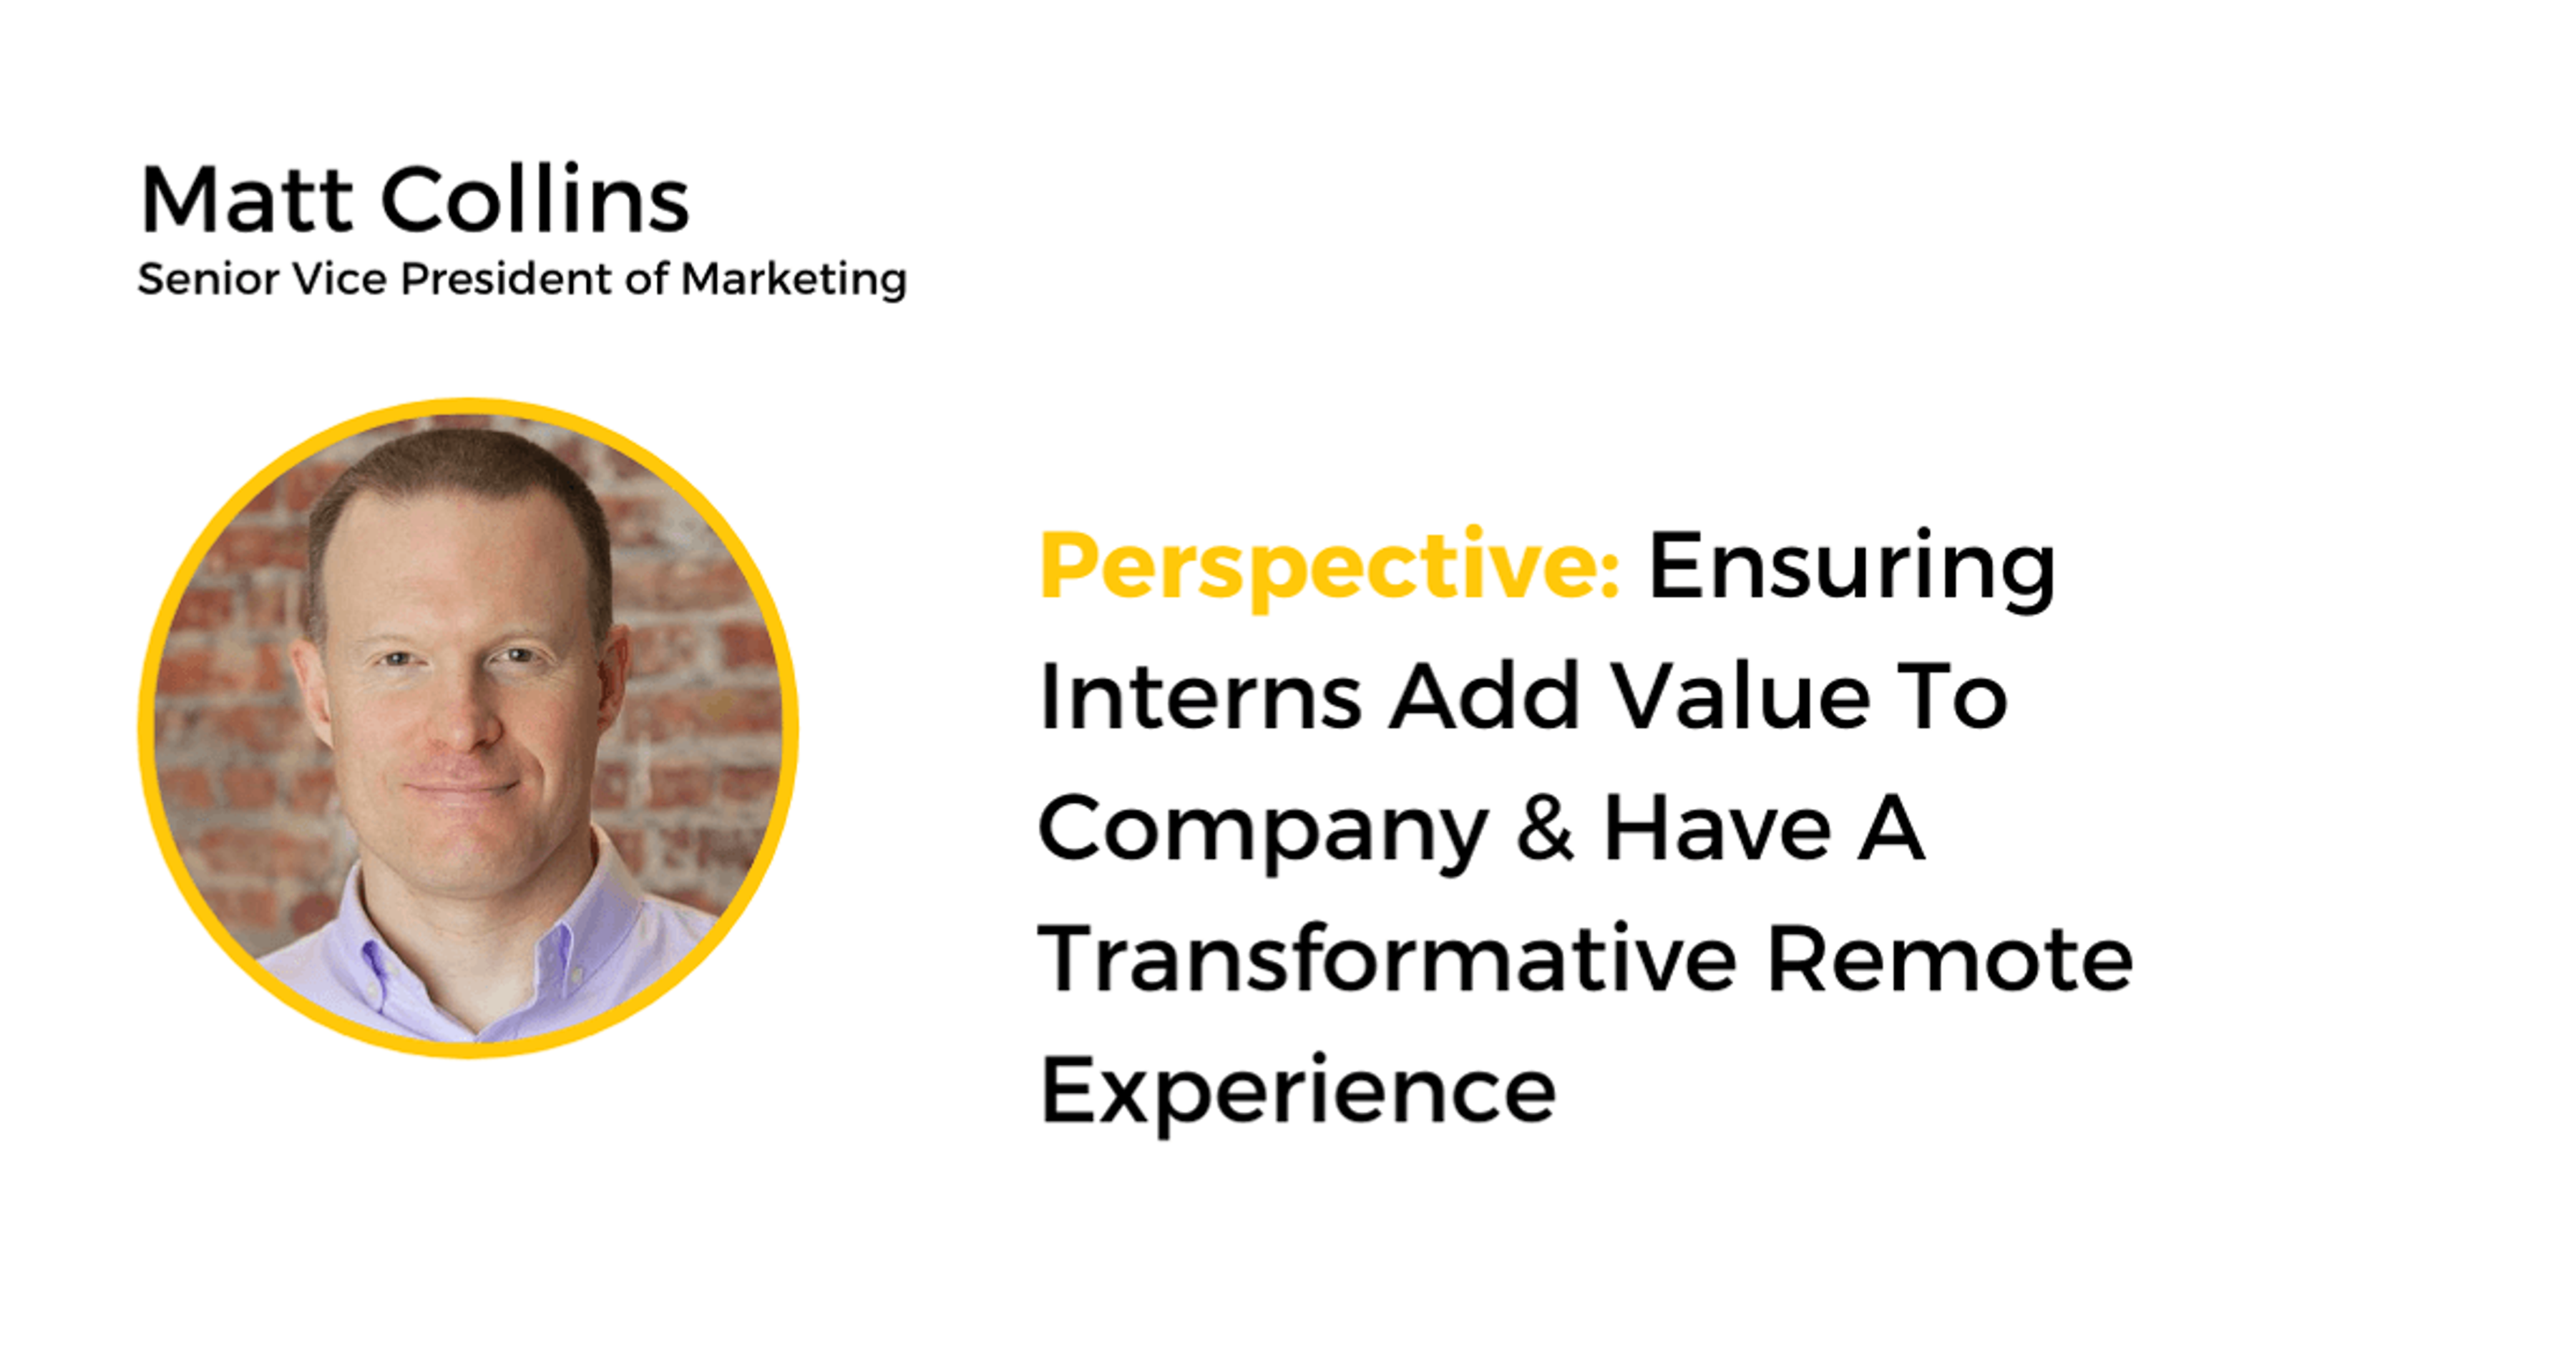 Matt Collins, senior vice president of marketing, shares his perspective on ensuring interns add value to company.